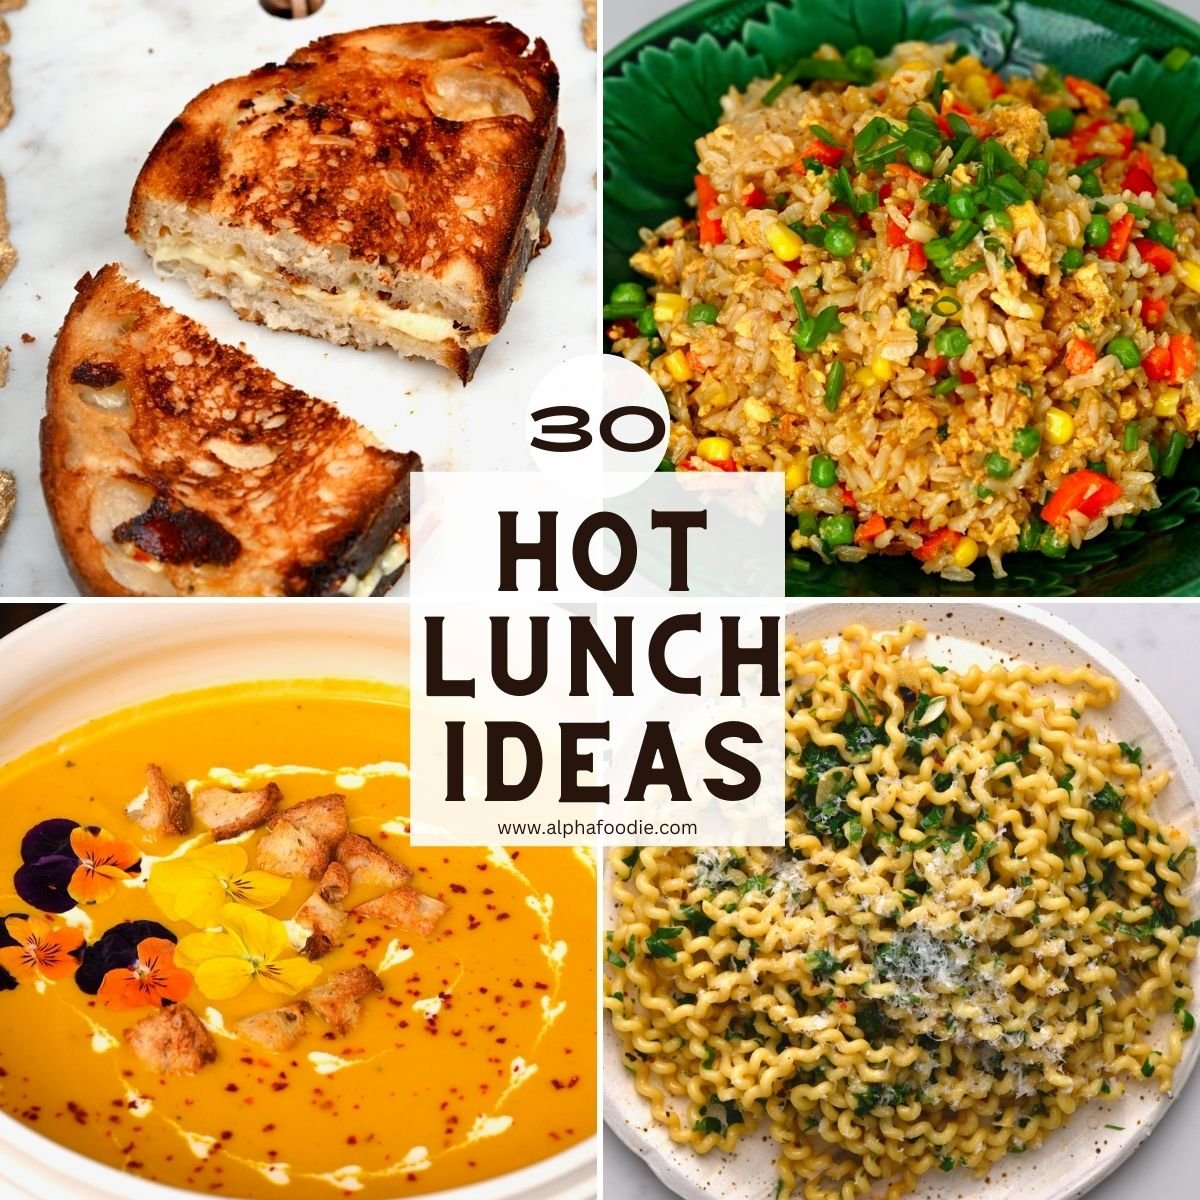 https://www.alphafoodie.com/wp-content/uploads/2022/09/Hot-Lunch-Ideas-square.jpeg